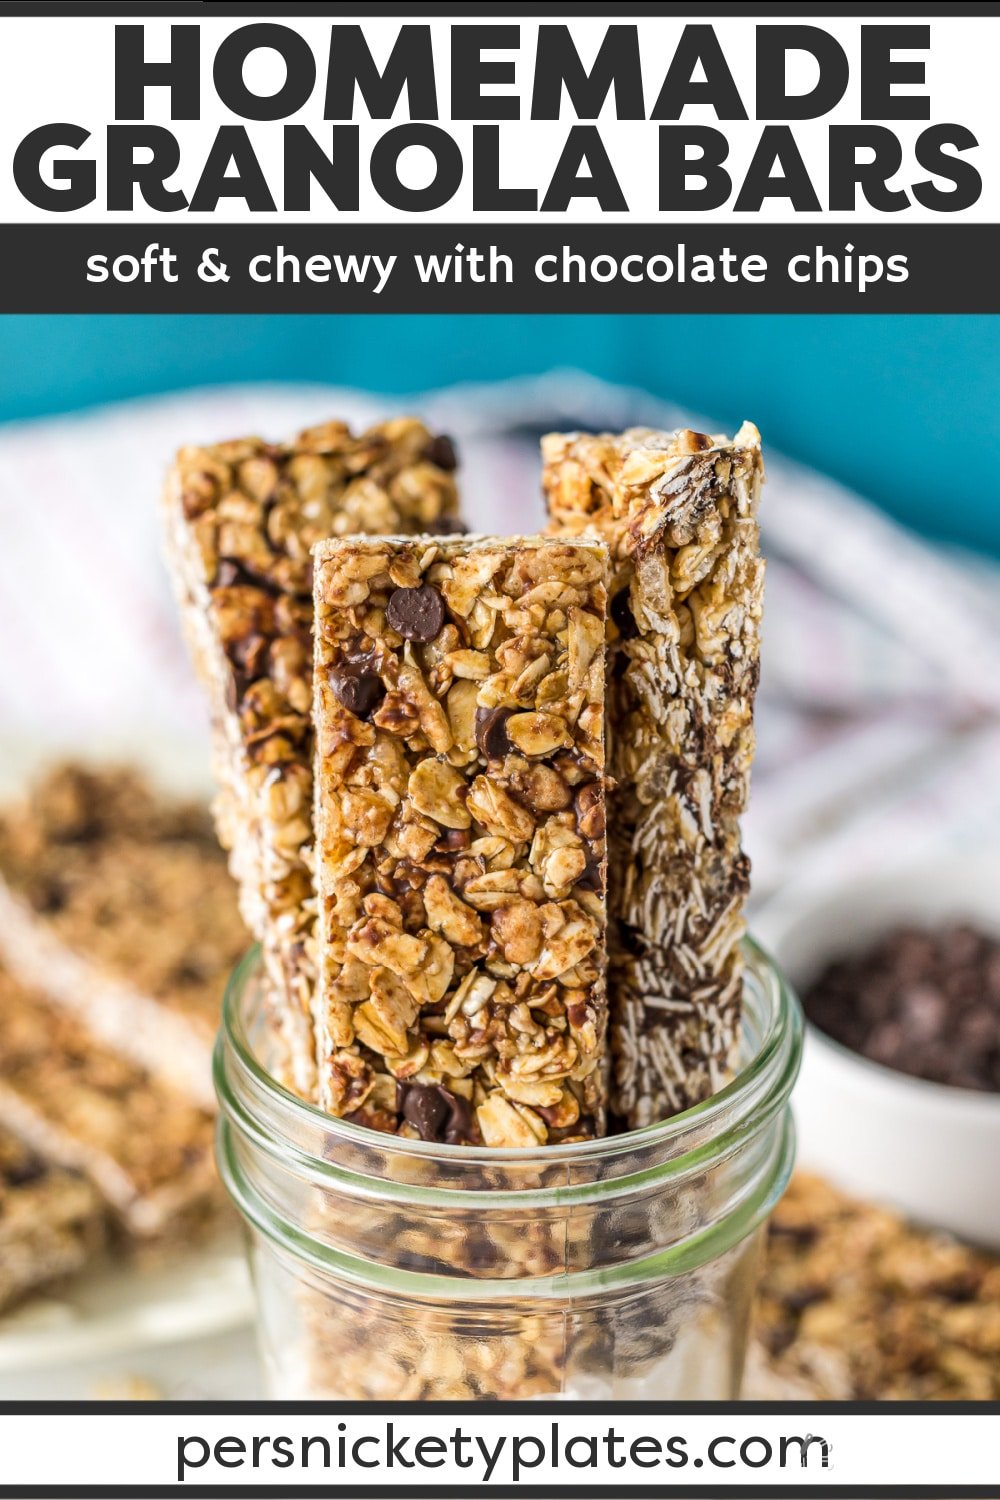 Sweet, salty, crispy, and chewy, these homemade chocolate chip granola bars are no-bake and easy to make. Loaded with oats, honey, chocolate chips, and crispy rice cereal, these bars are perfect for hikes, snacks, or kid’s lunchboxes!  | www.persnicketyplates.com